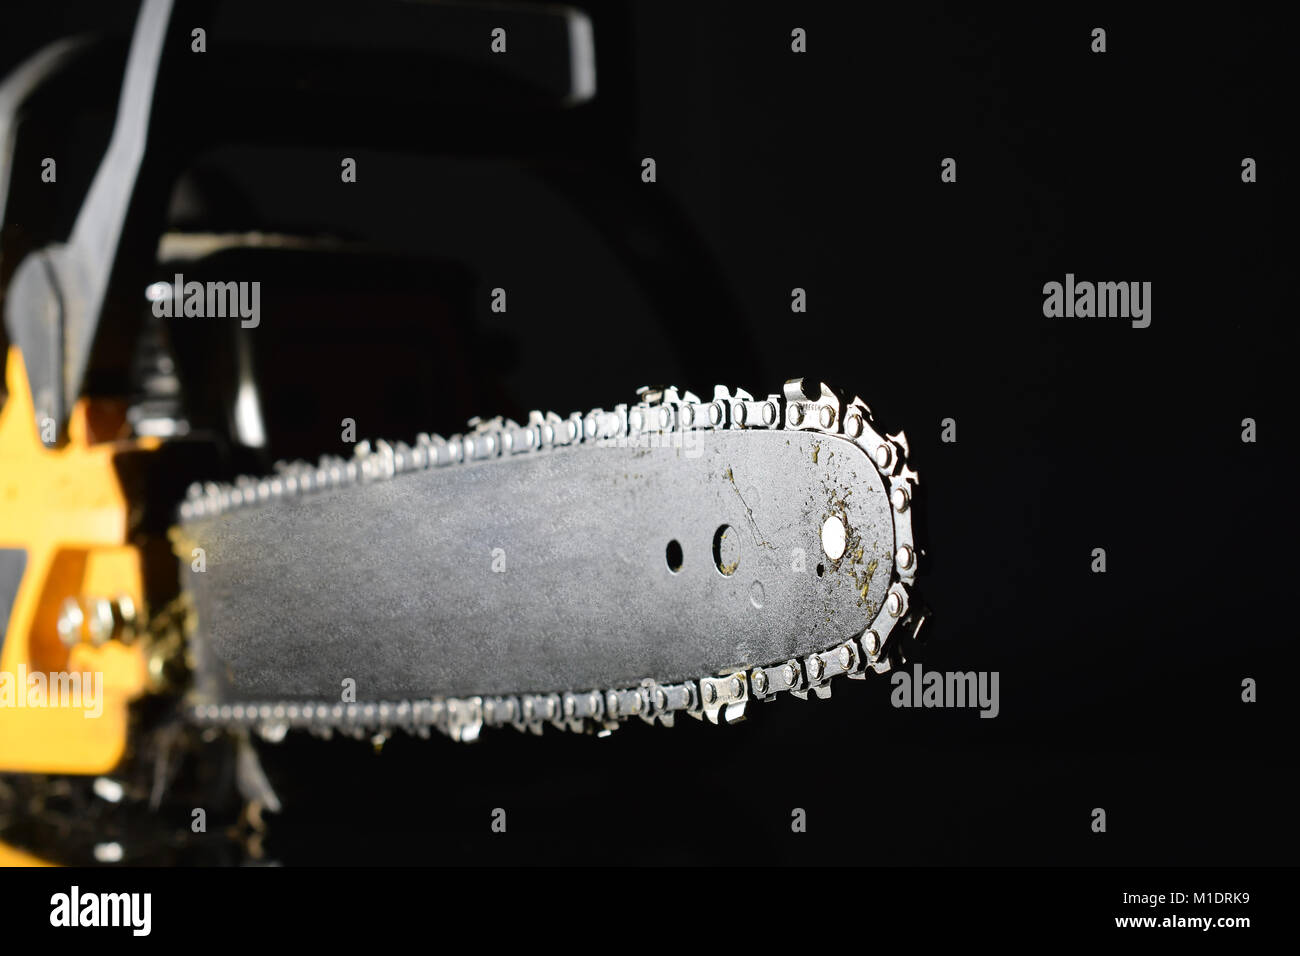 Chainsaw studio close up image. Shallow depth of field. Stock Photo